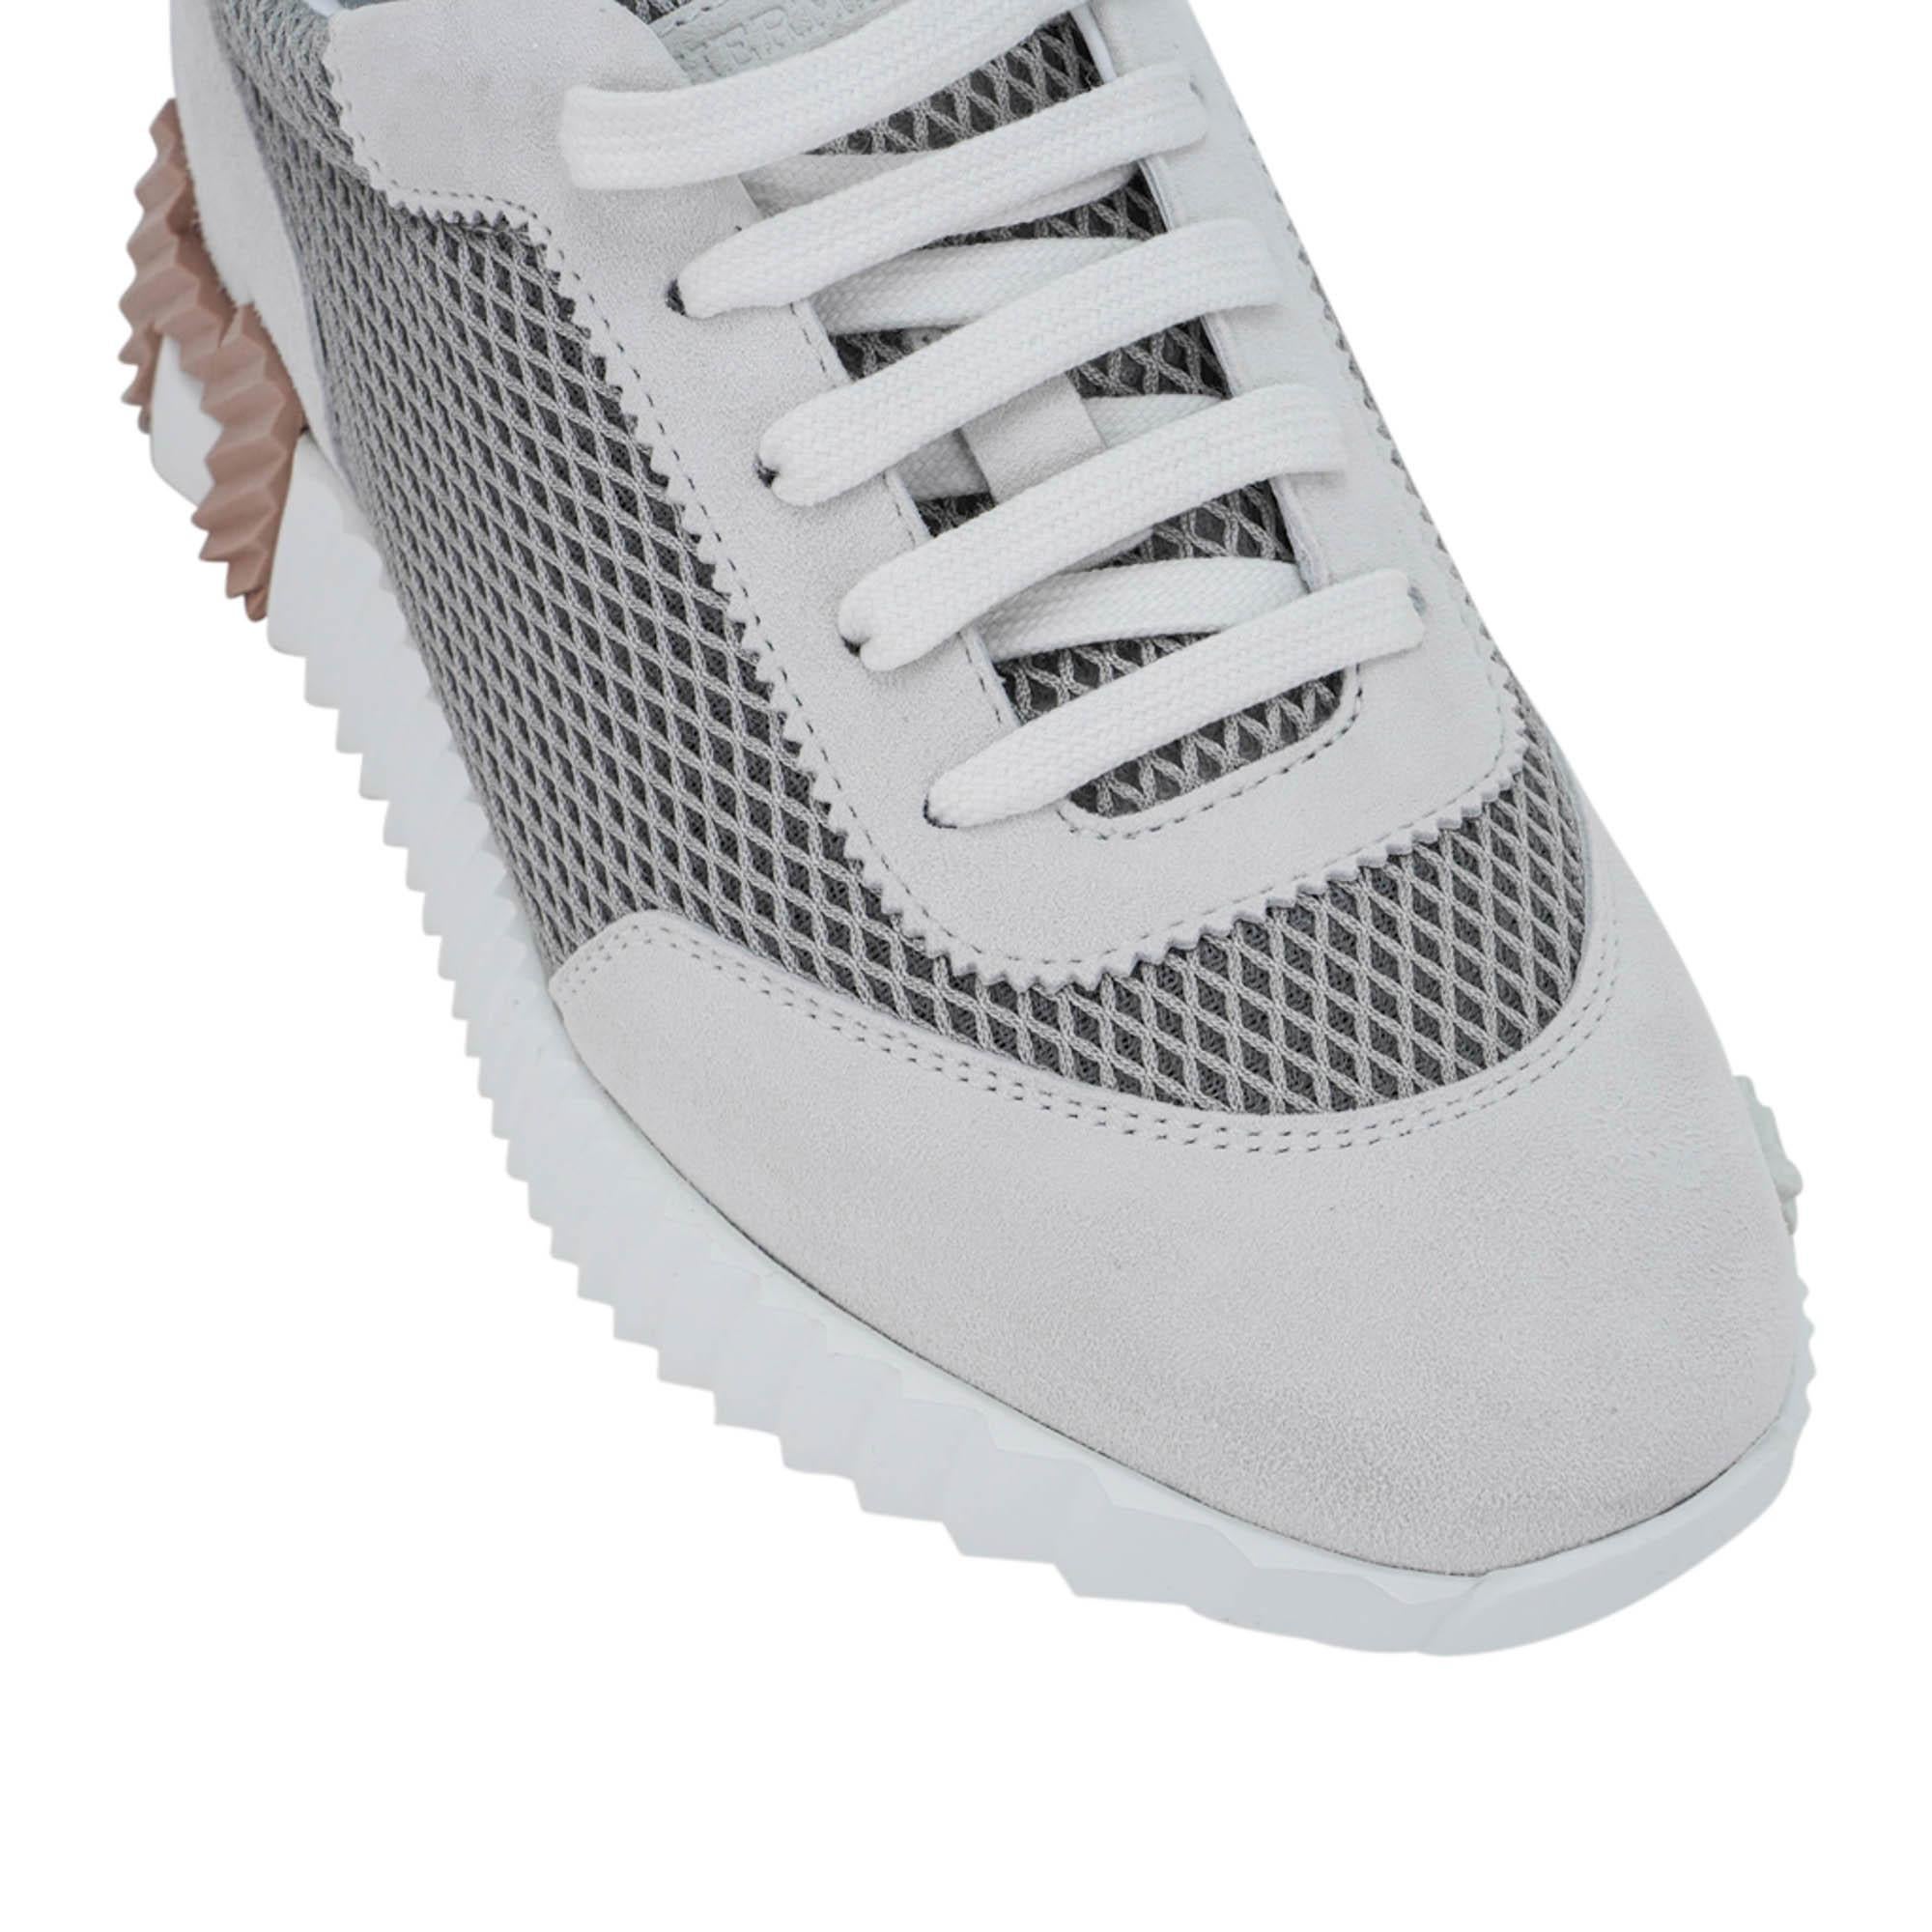 Mightychic offers a pair of Hermes Bouncing Sneaker featured in Gris Lulea and Blanc.
The sneaker is composed of a graphic mesh and goatskin.
H on outside of the shoe as well as the light weight sole.
Made in Italy
NEW or NEVER WORN.
final